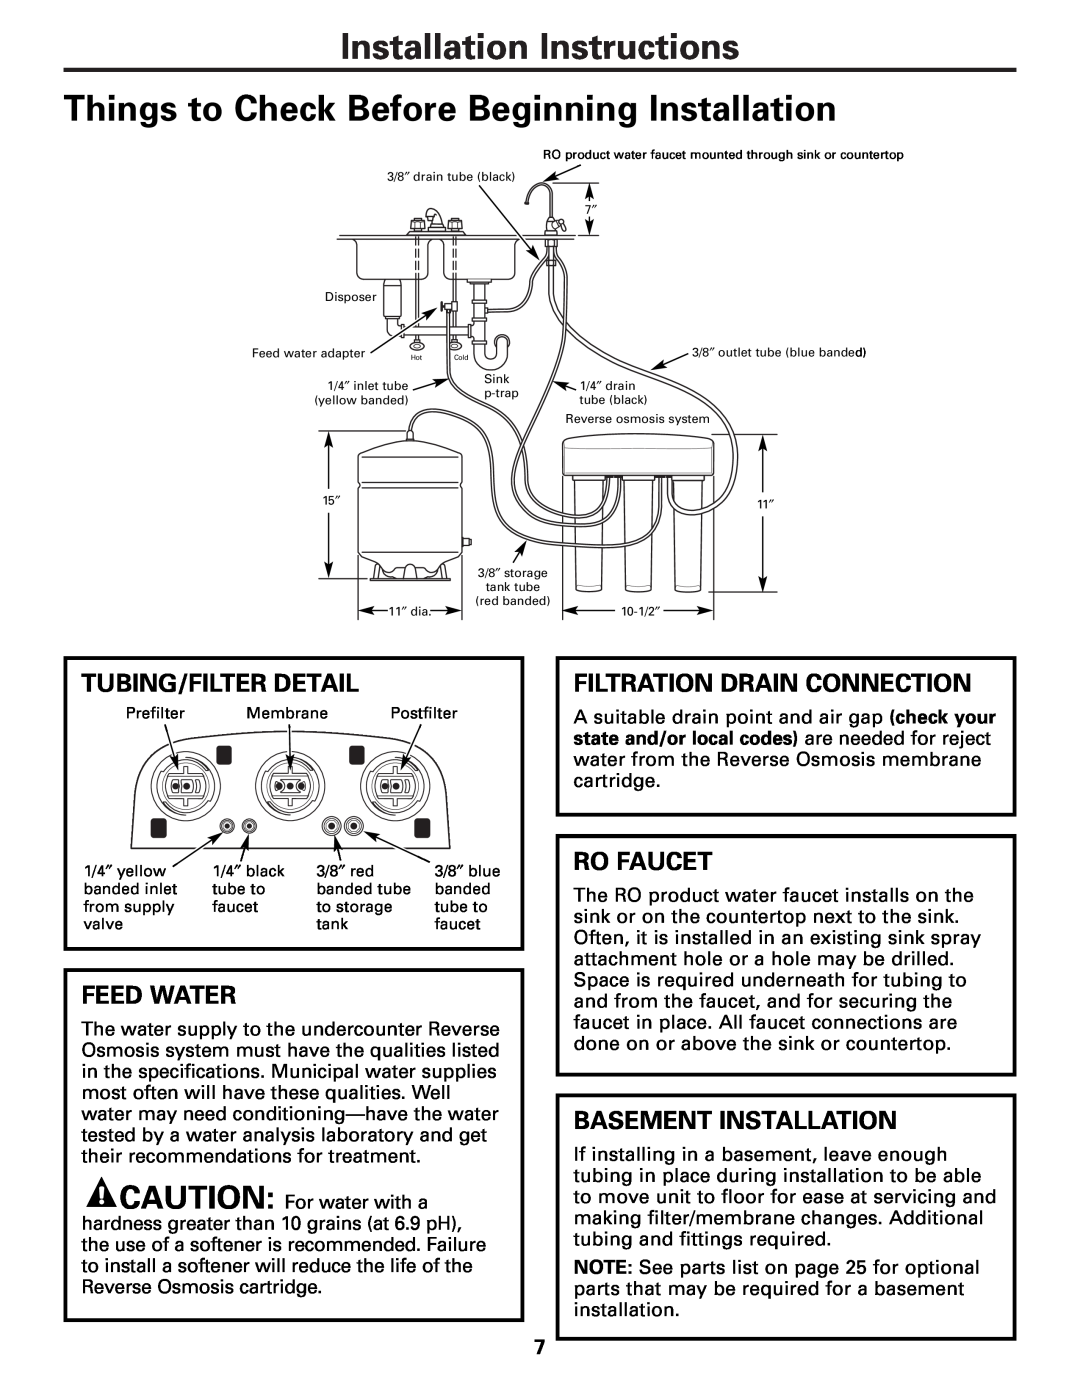 GE PXRQ15F Installation Instructions, Things to Check Before Beginning Installation, Tubing/Filter Detail, Feed Water 